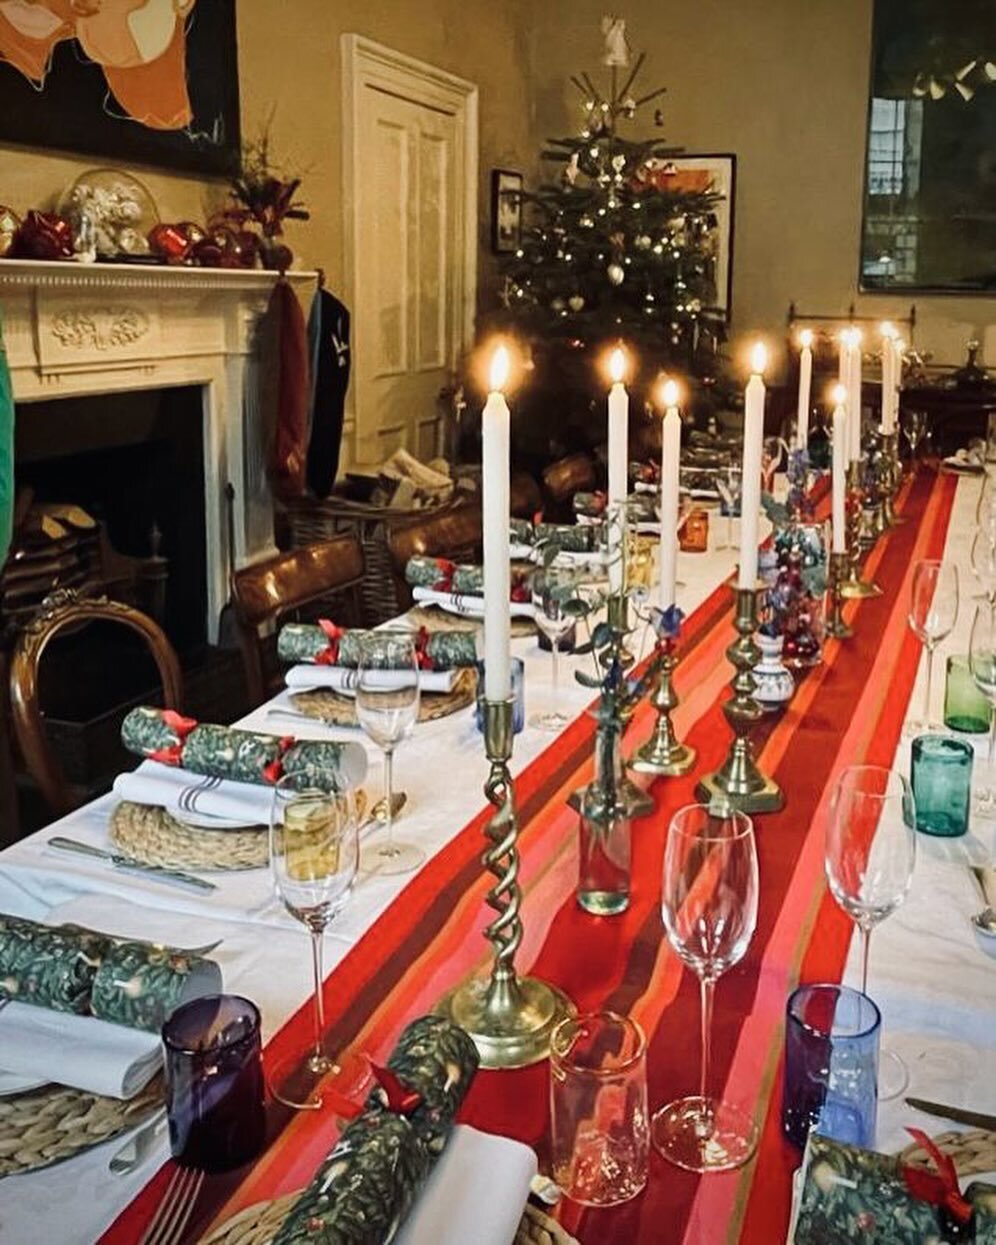 Christmas Party tablescaoe for a very well deserved end of year celebration 🍾🌲

Glasses @williamyeowardcrystal 
Runner @thestripescompany 
Tumblers @lindeanmillglass 
Napkins @clothshoplondon 
Candlesticks @vaultofcuriosity
Crackers @nancyandbetty